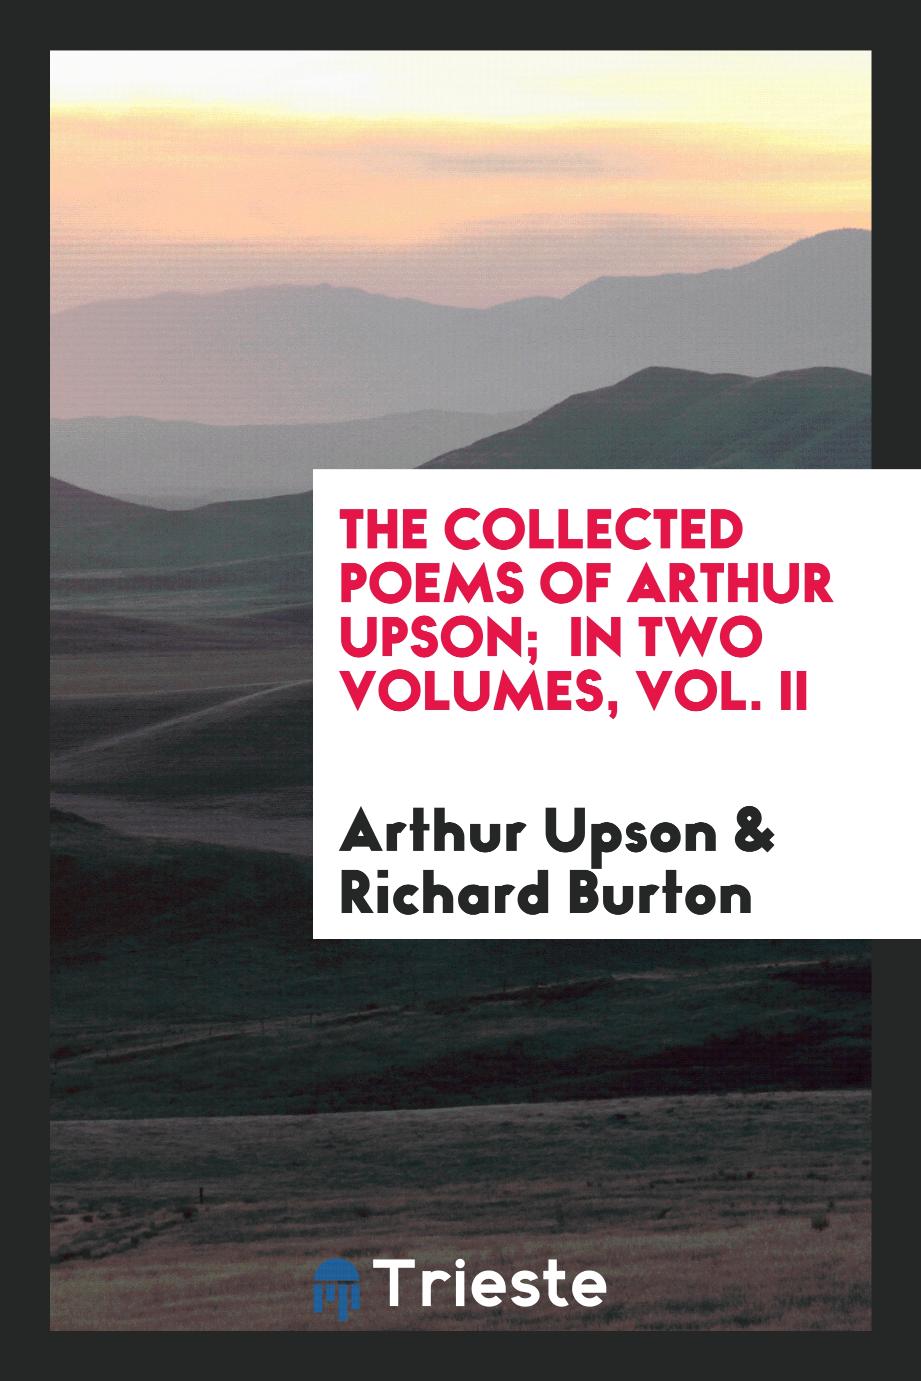 The Collected poems of Arthur Upson; In two volumes, Vol. II